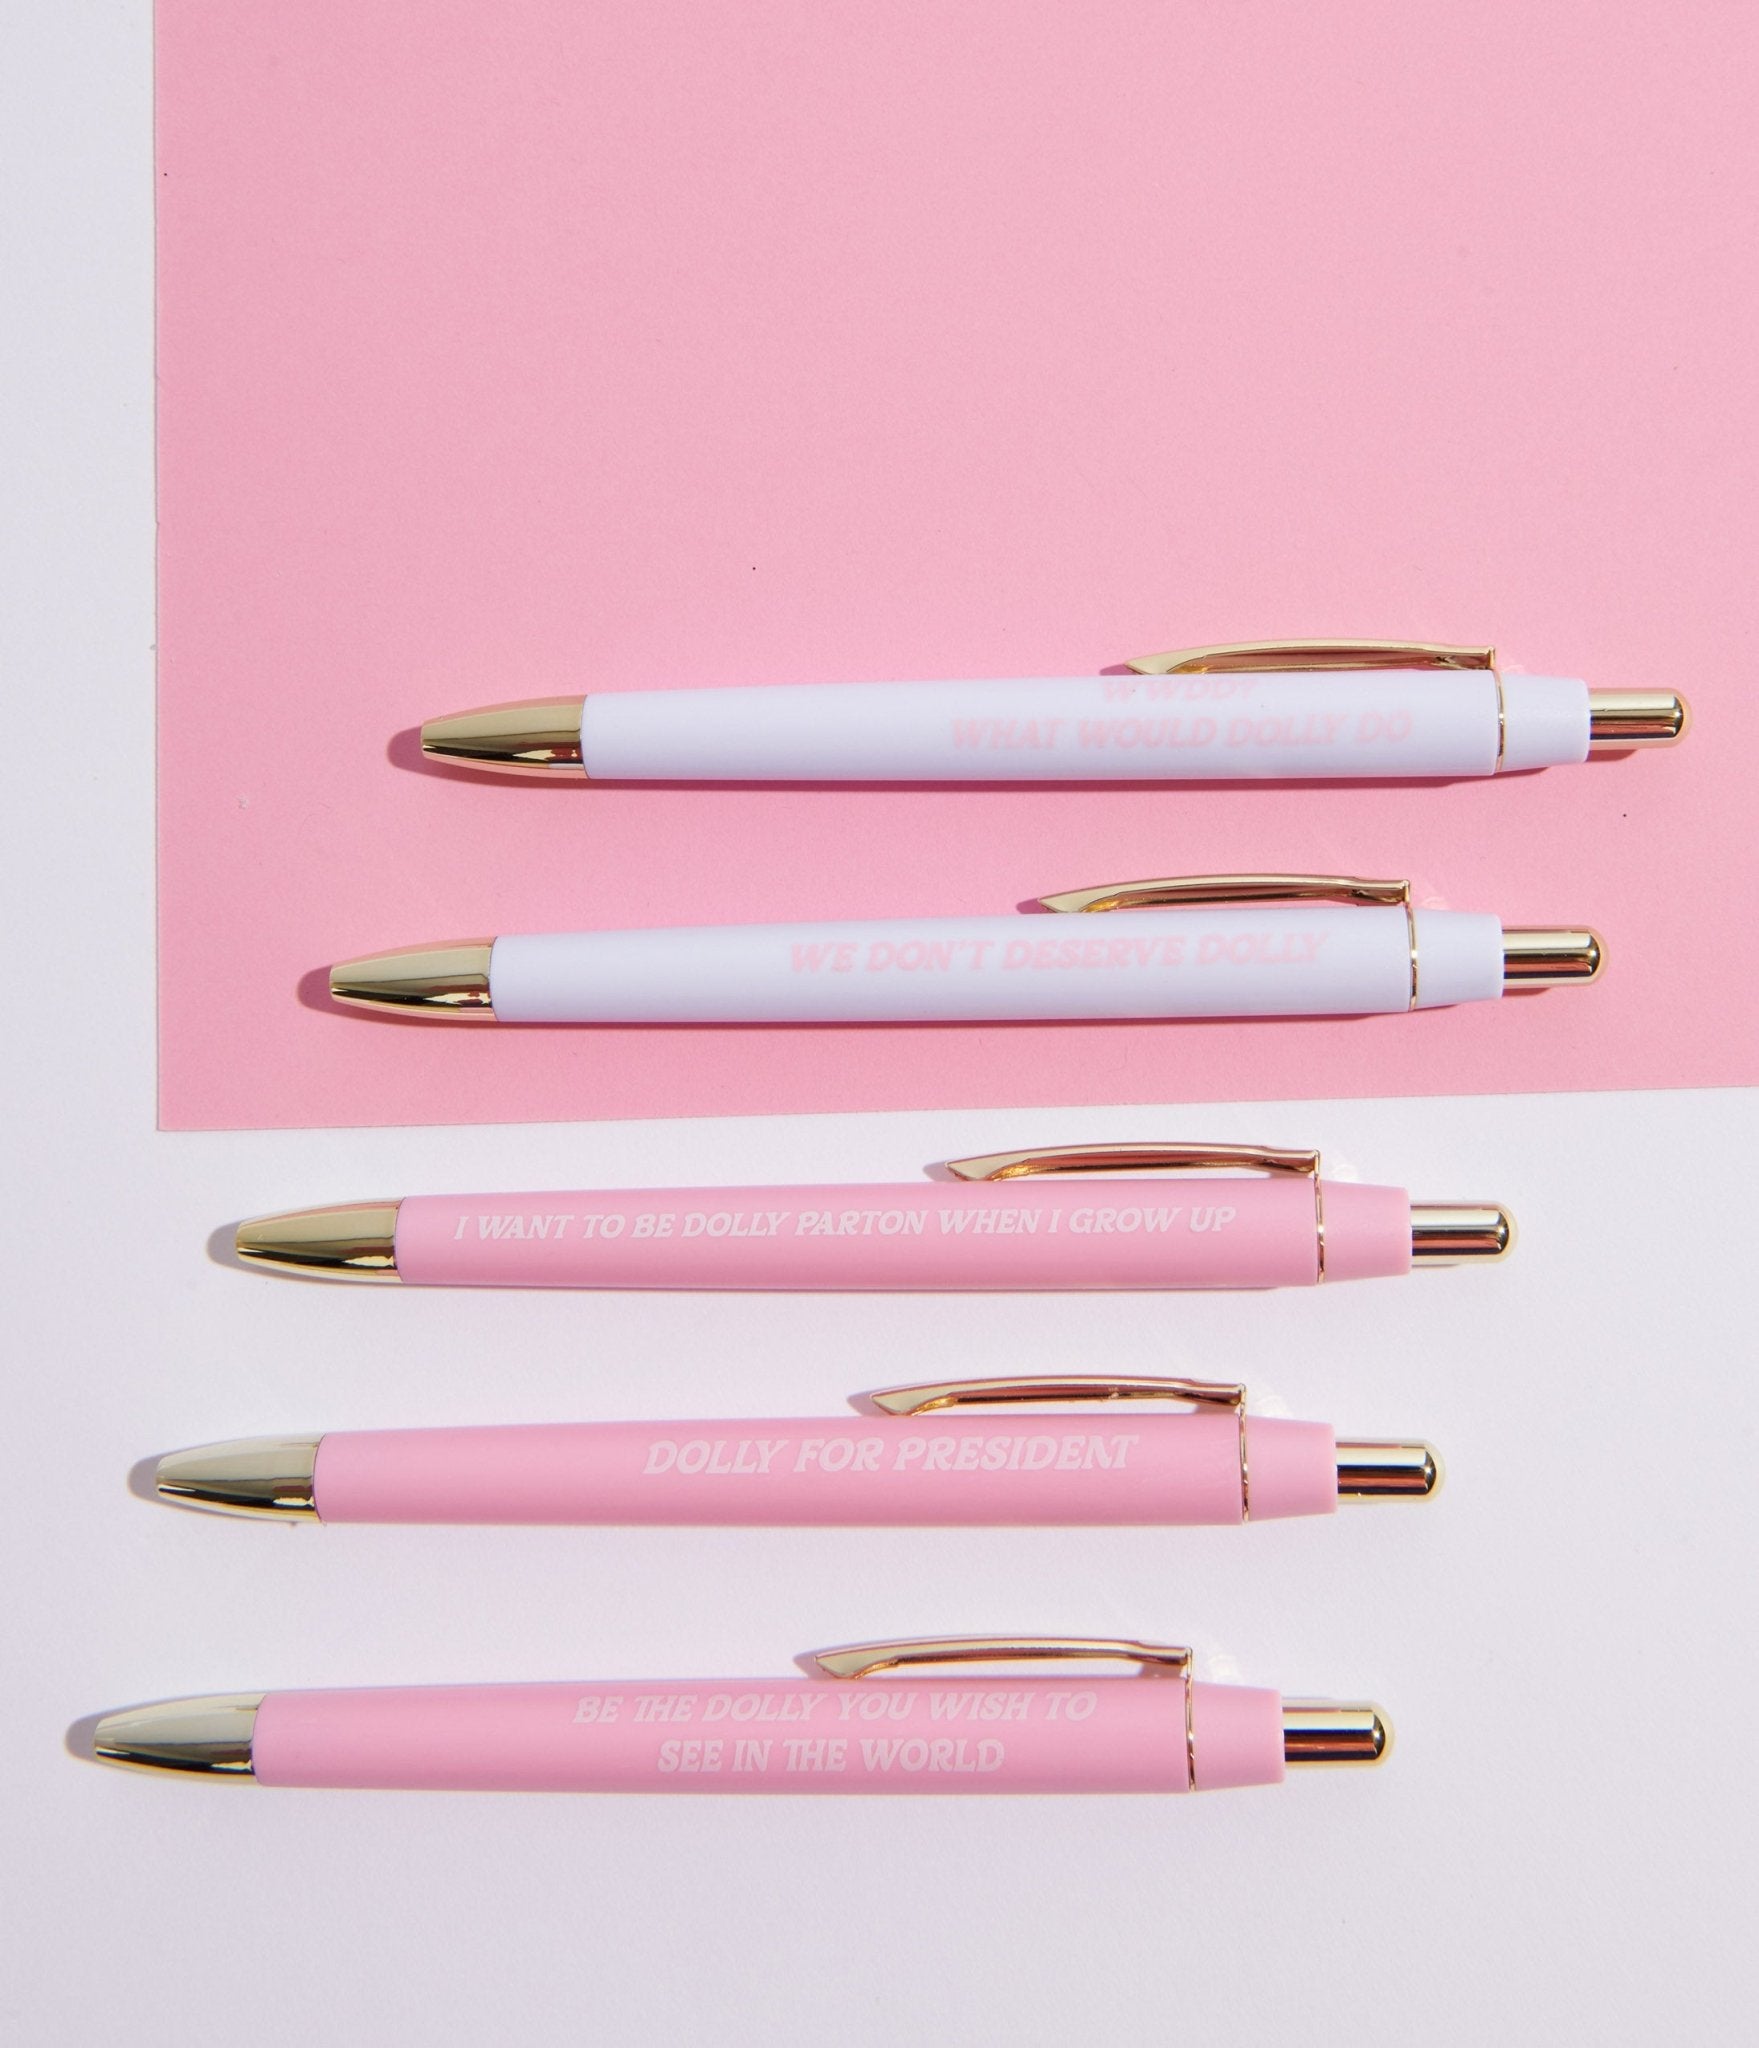 https://cdn.shopify.com/s/files/1/2714/9310/products/i-love-the-queen-of-country-pen-set-288093.jpg?v=1703095717